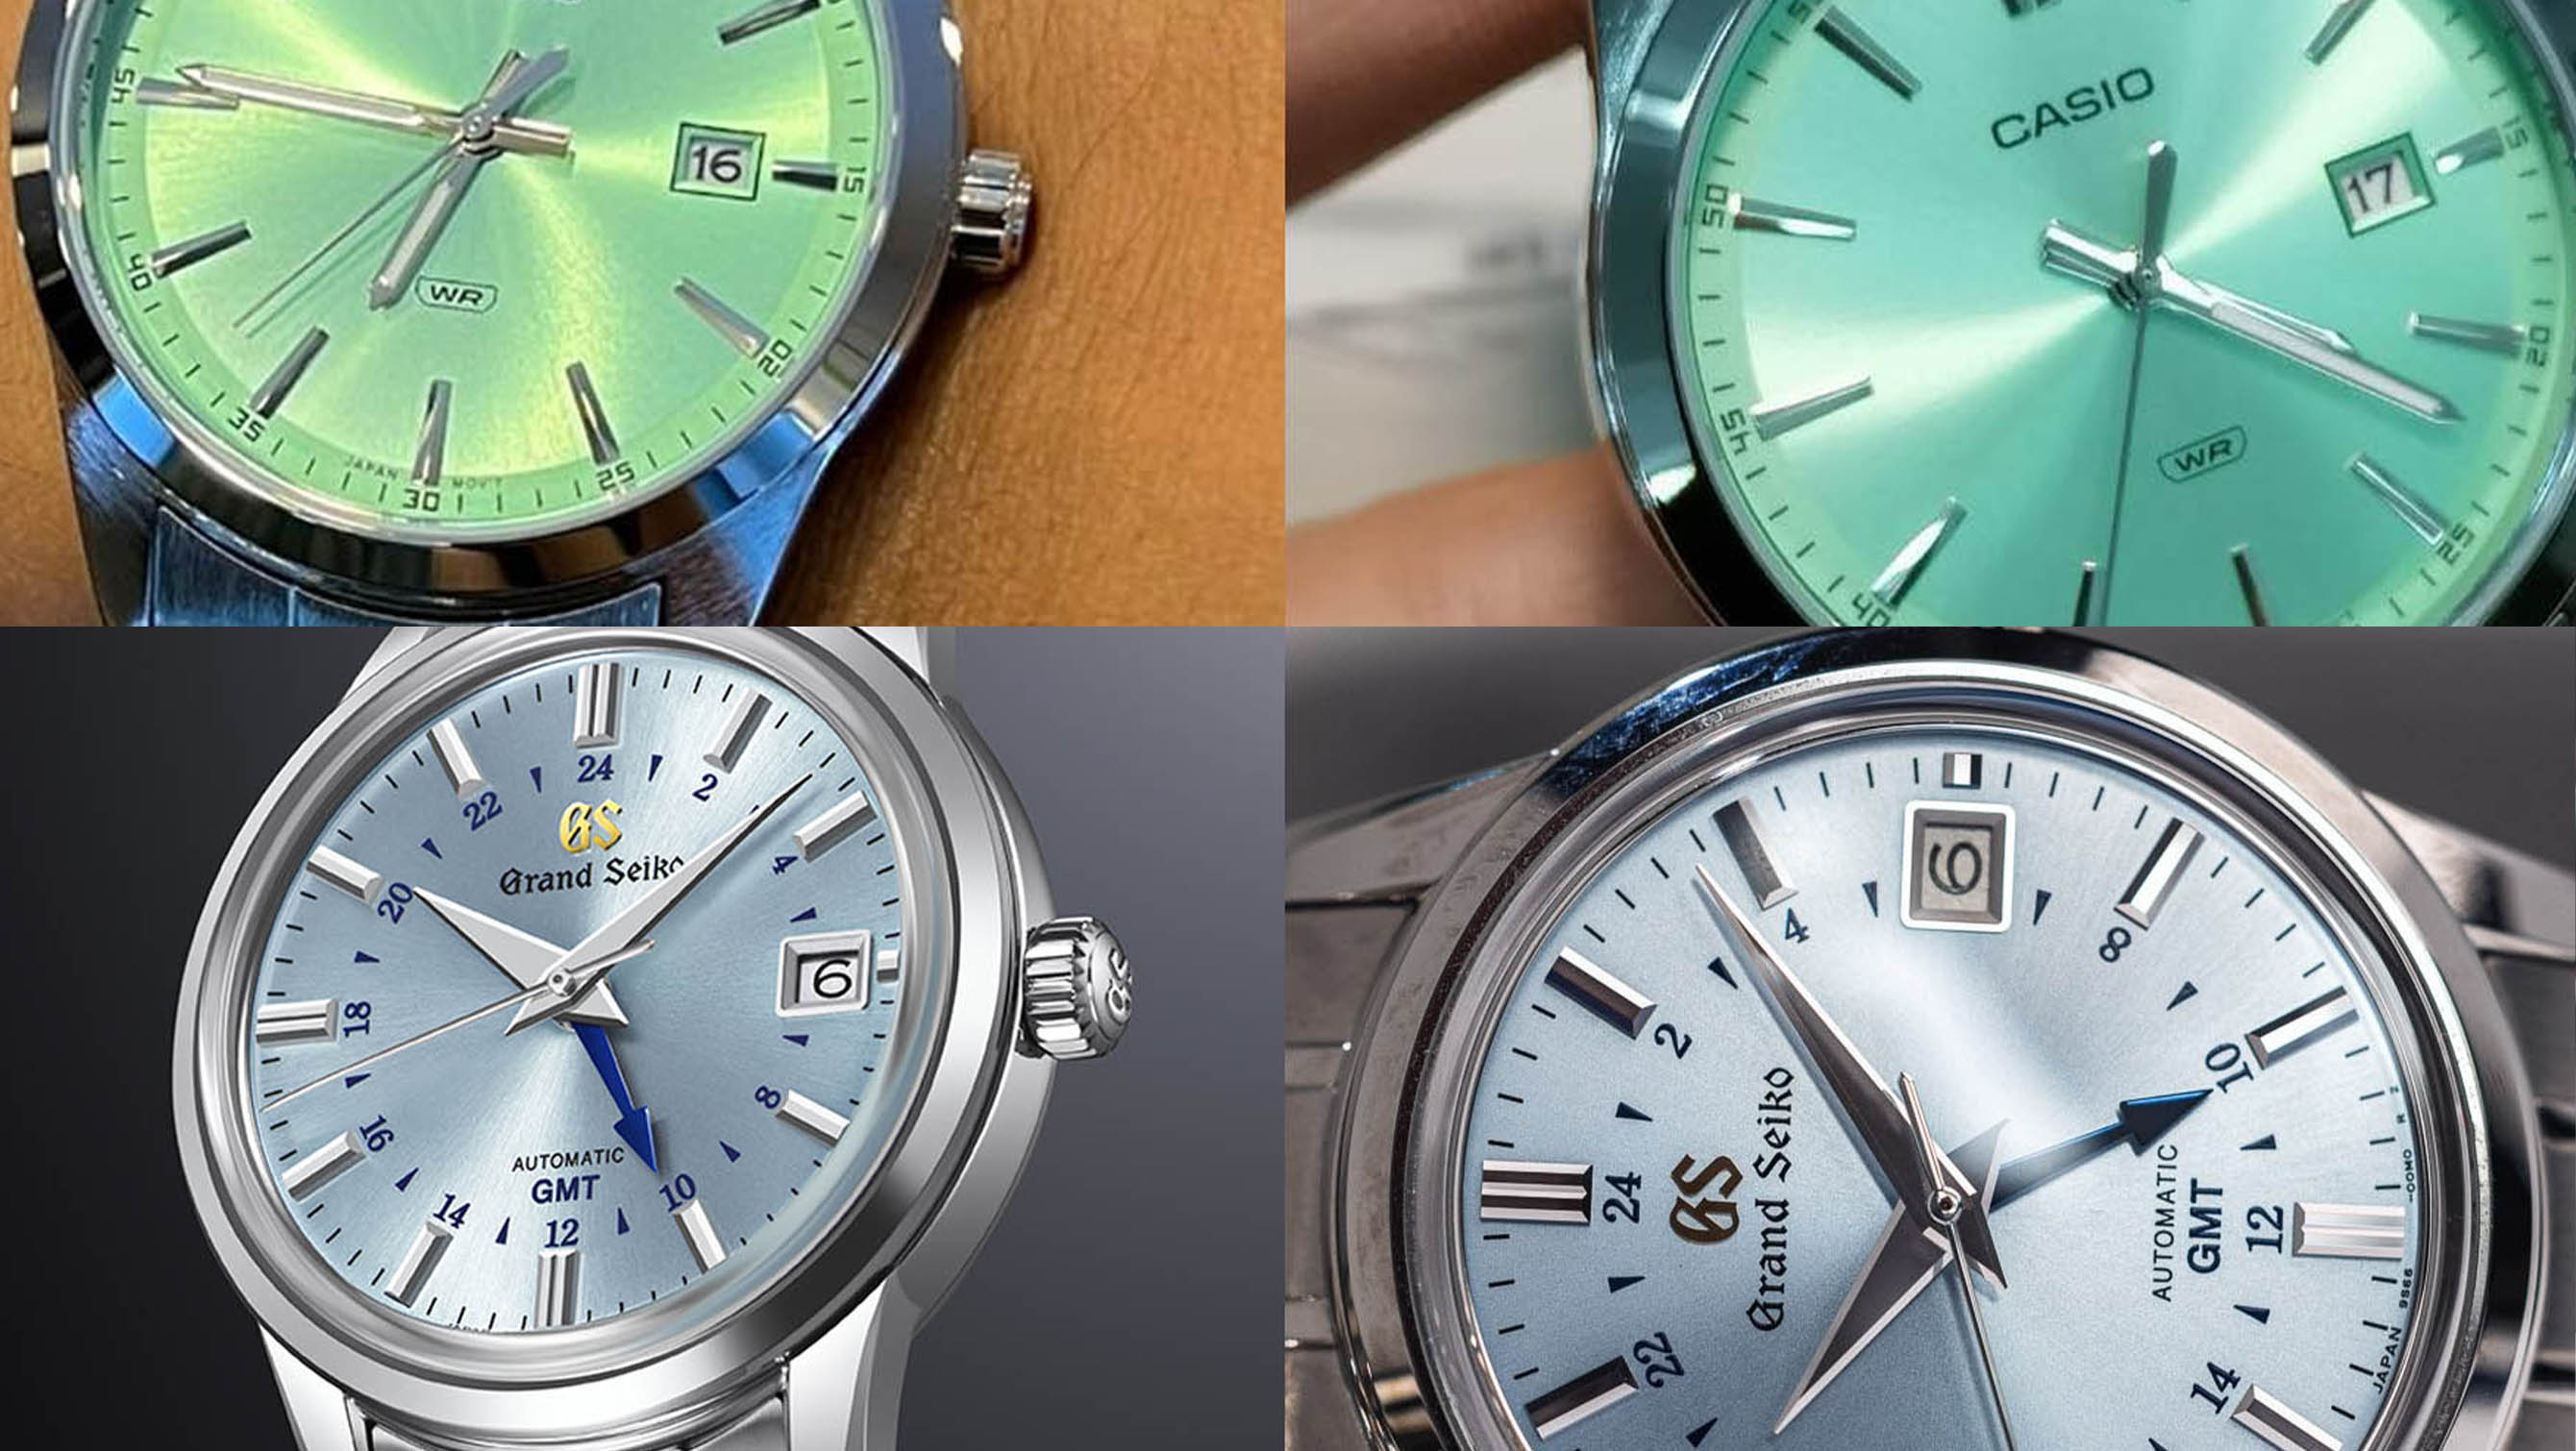 How watches can change in photos versus reality